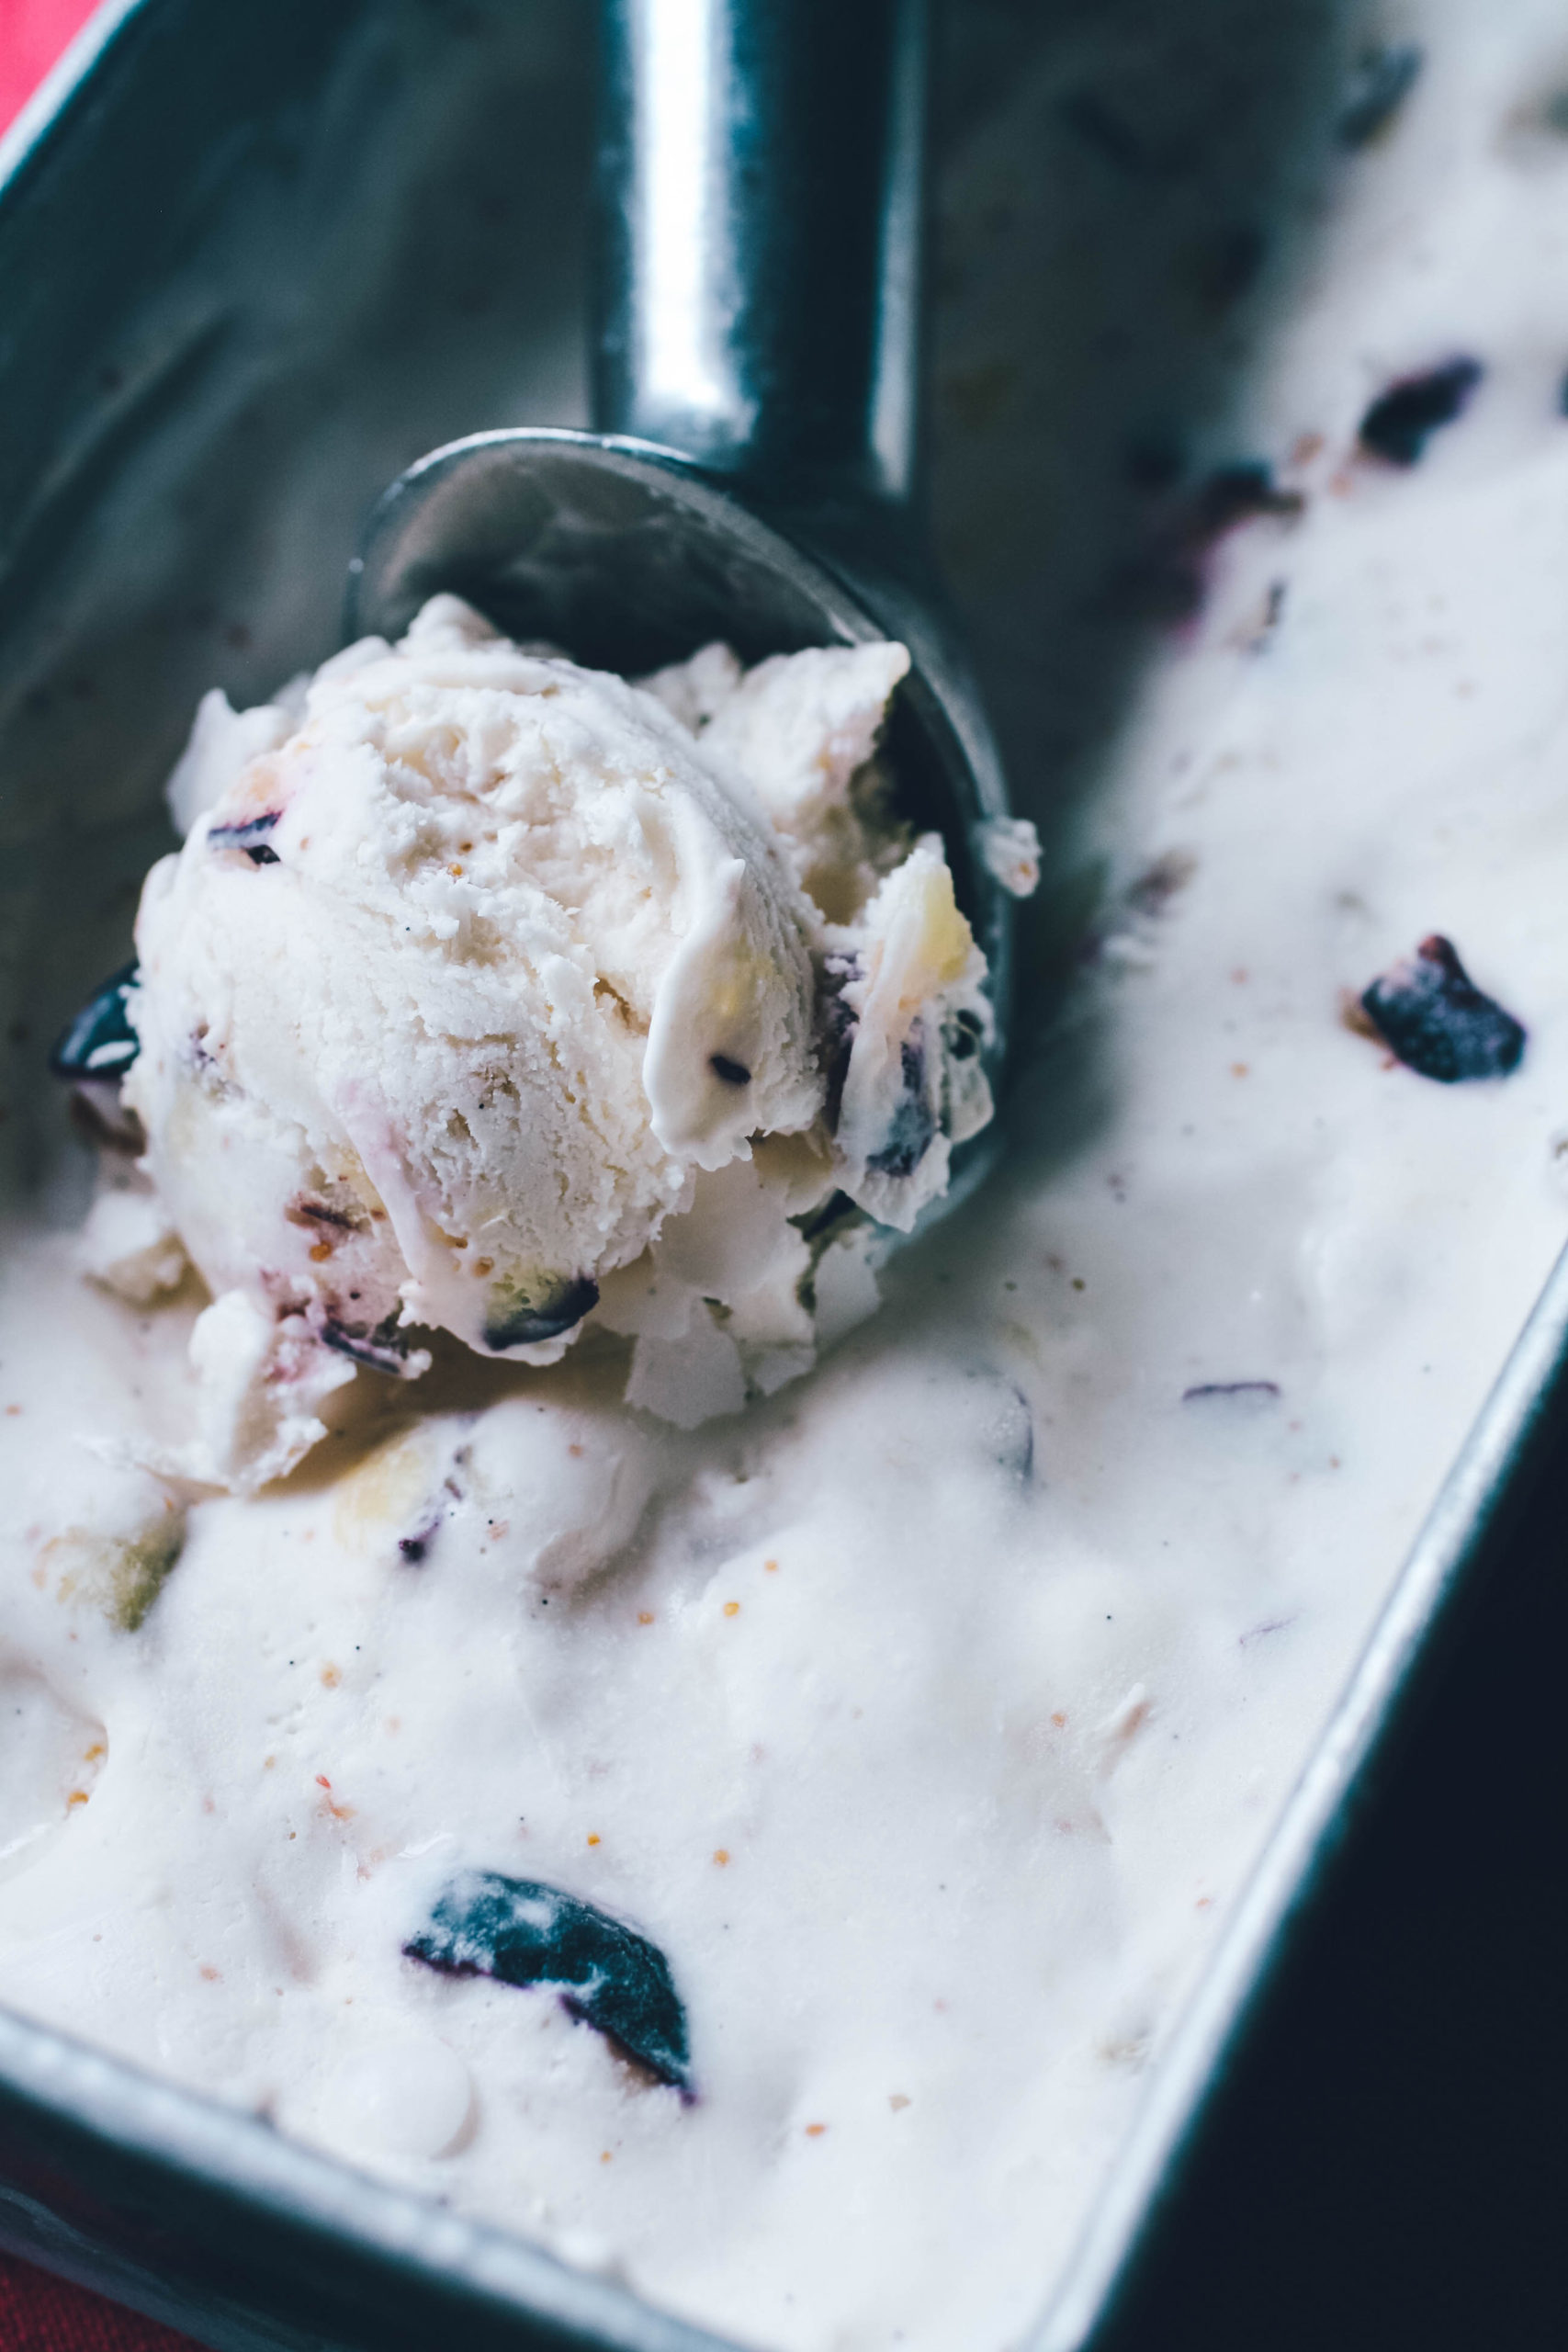 Fig and Vanilla Gelato is a great frozen treat to scoop up this season!